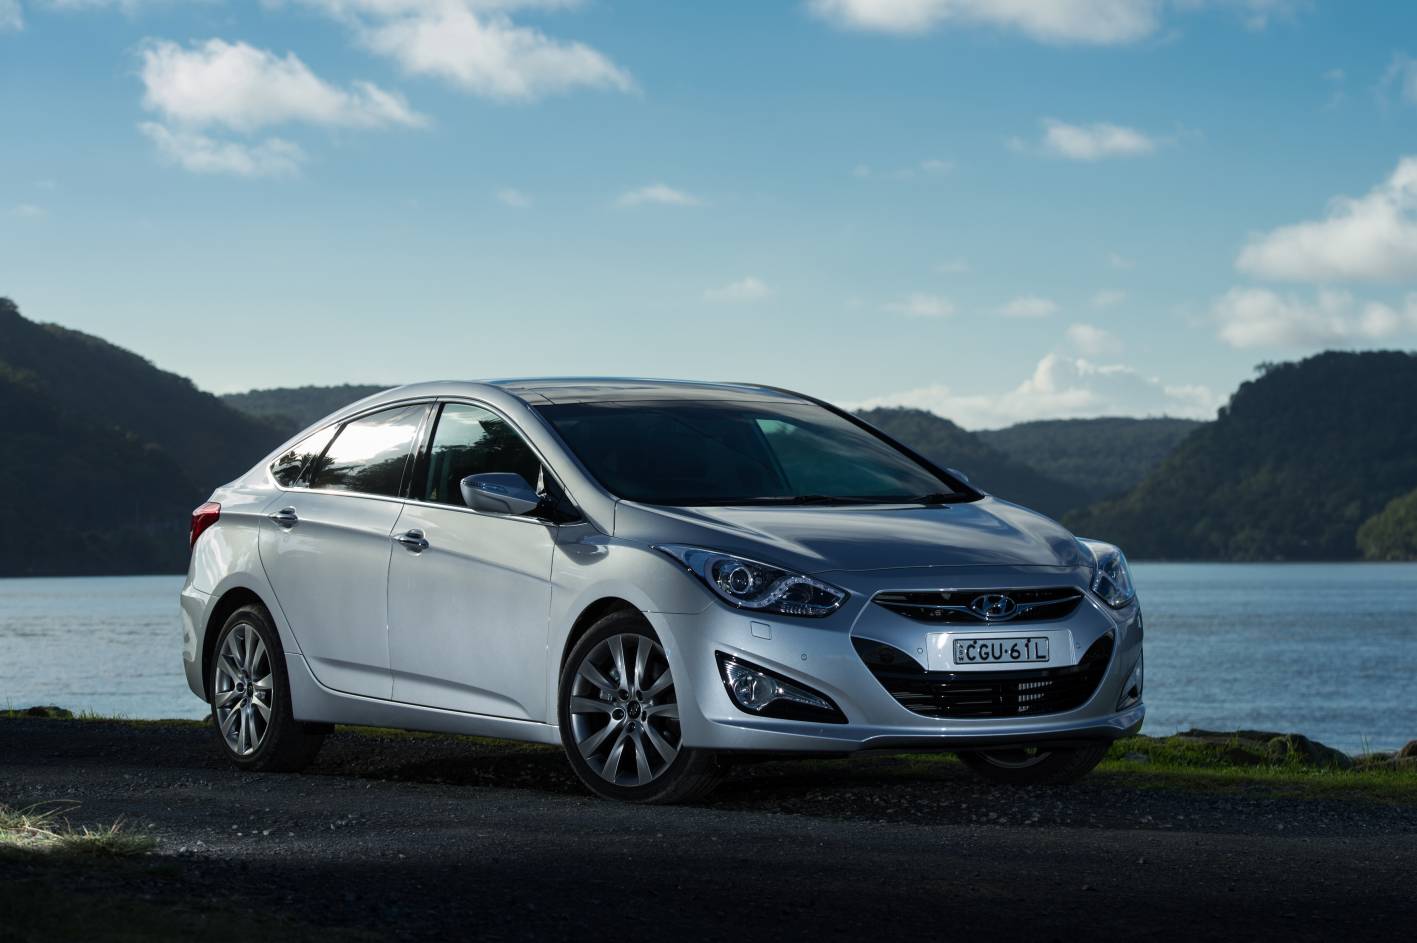 Review - 2013 Hyundai i40 Diesel Review and Road test